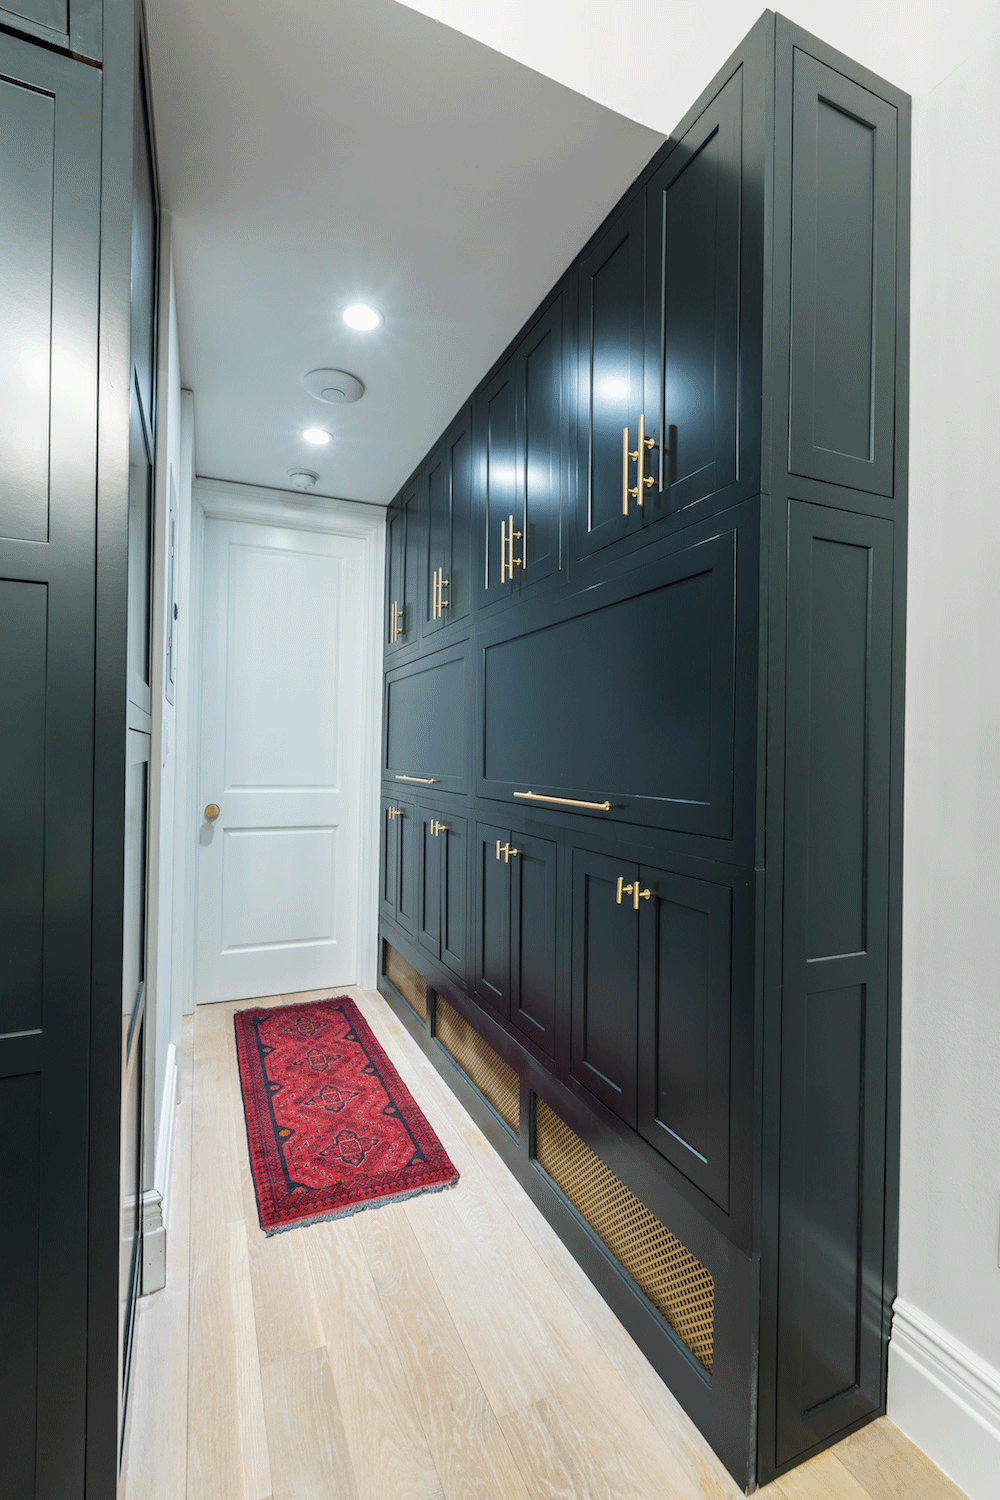 black storage cabinets till roof with gold handles in entryway after renovation